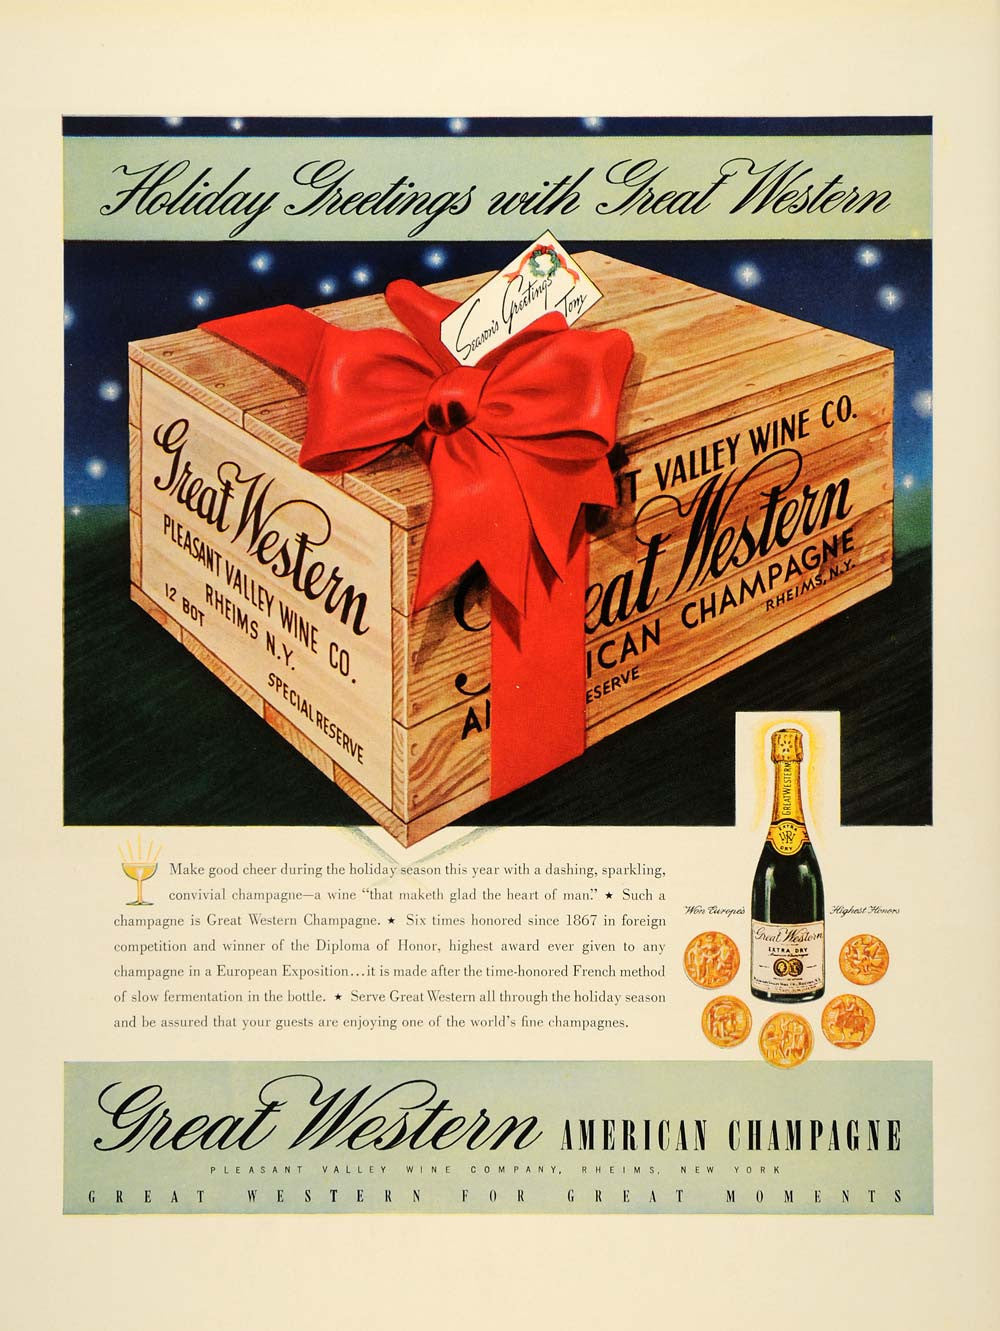 1937 Ad Great Western Pleasant Valley Wine Champagne - ORIGINAL ADVERTISING FTT9 - Period Paper
